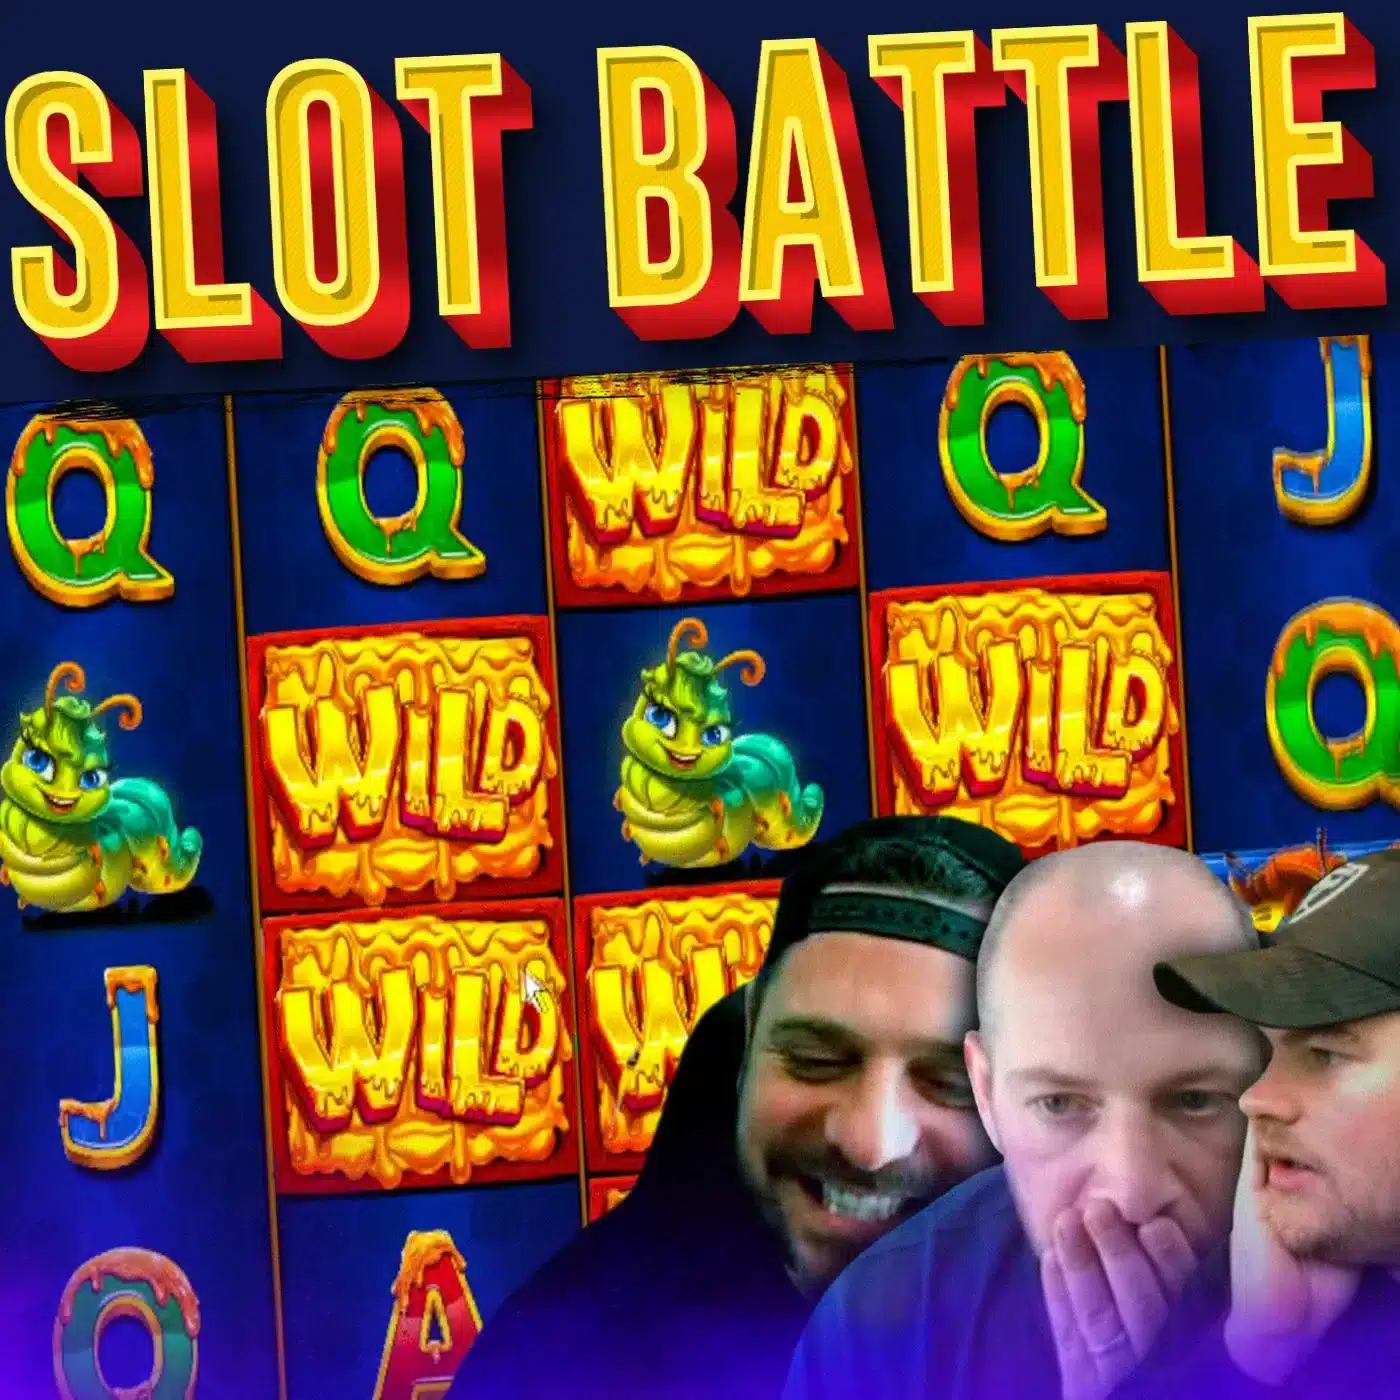 Spirit Blast (OctoPlay) Slot Review - 💎AboutSlots